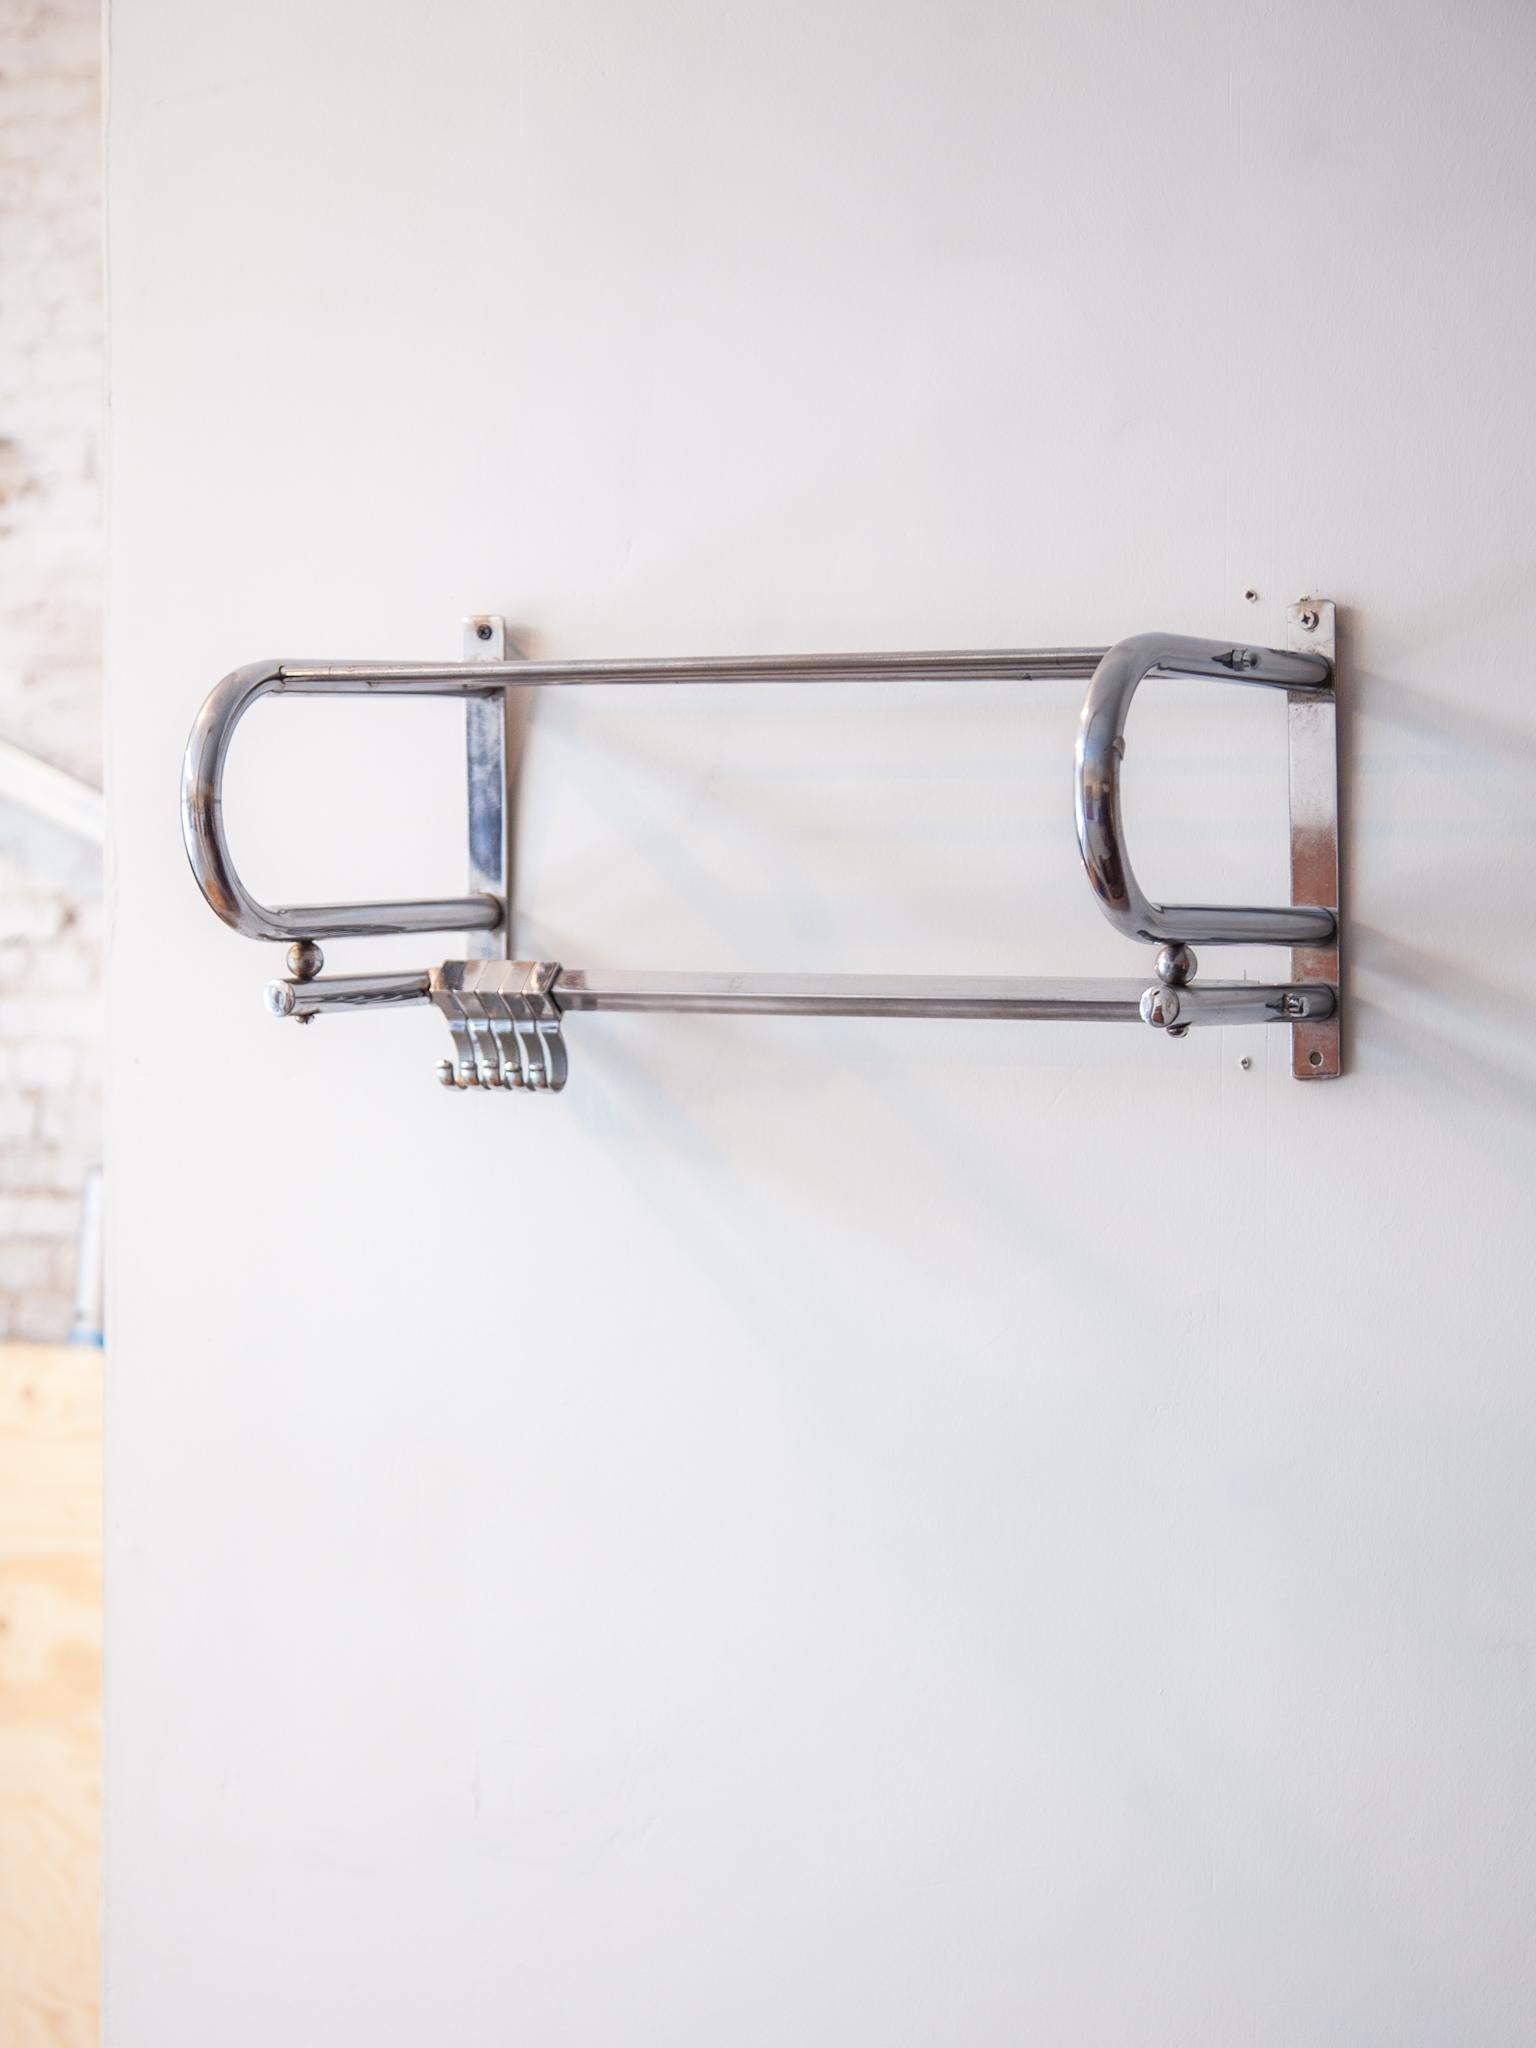 Mid-20th Century Wall Hanging Coat Rack 1950s Chrome For Sale